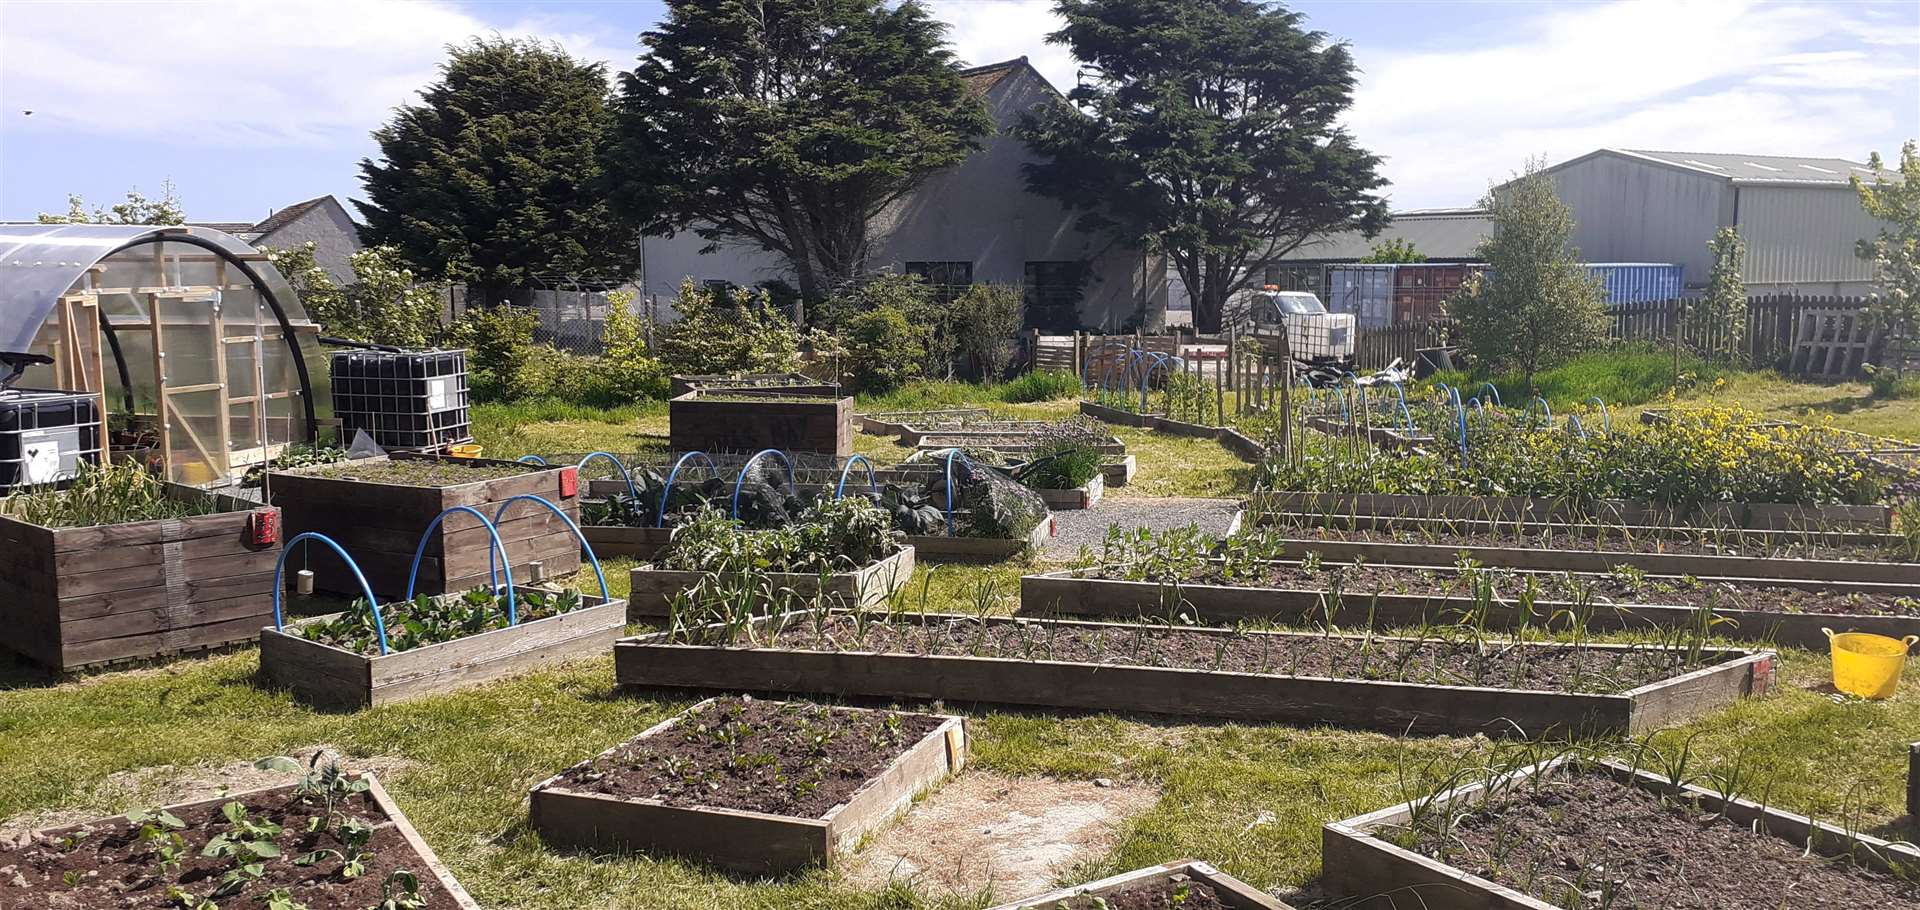 The community gardens at Ormlie.